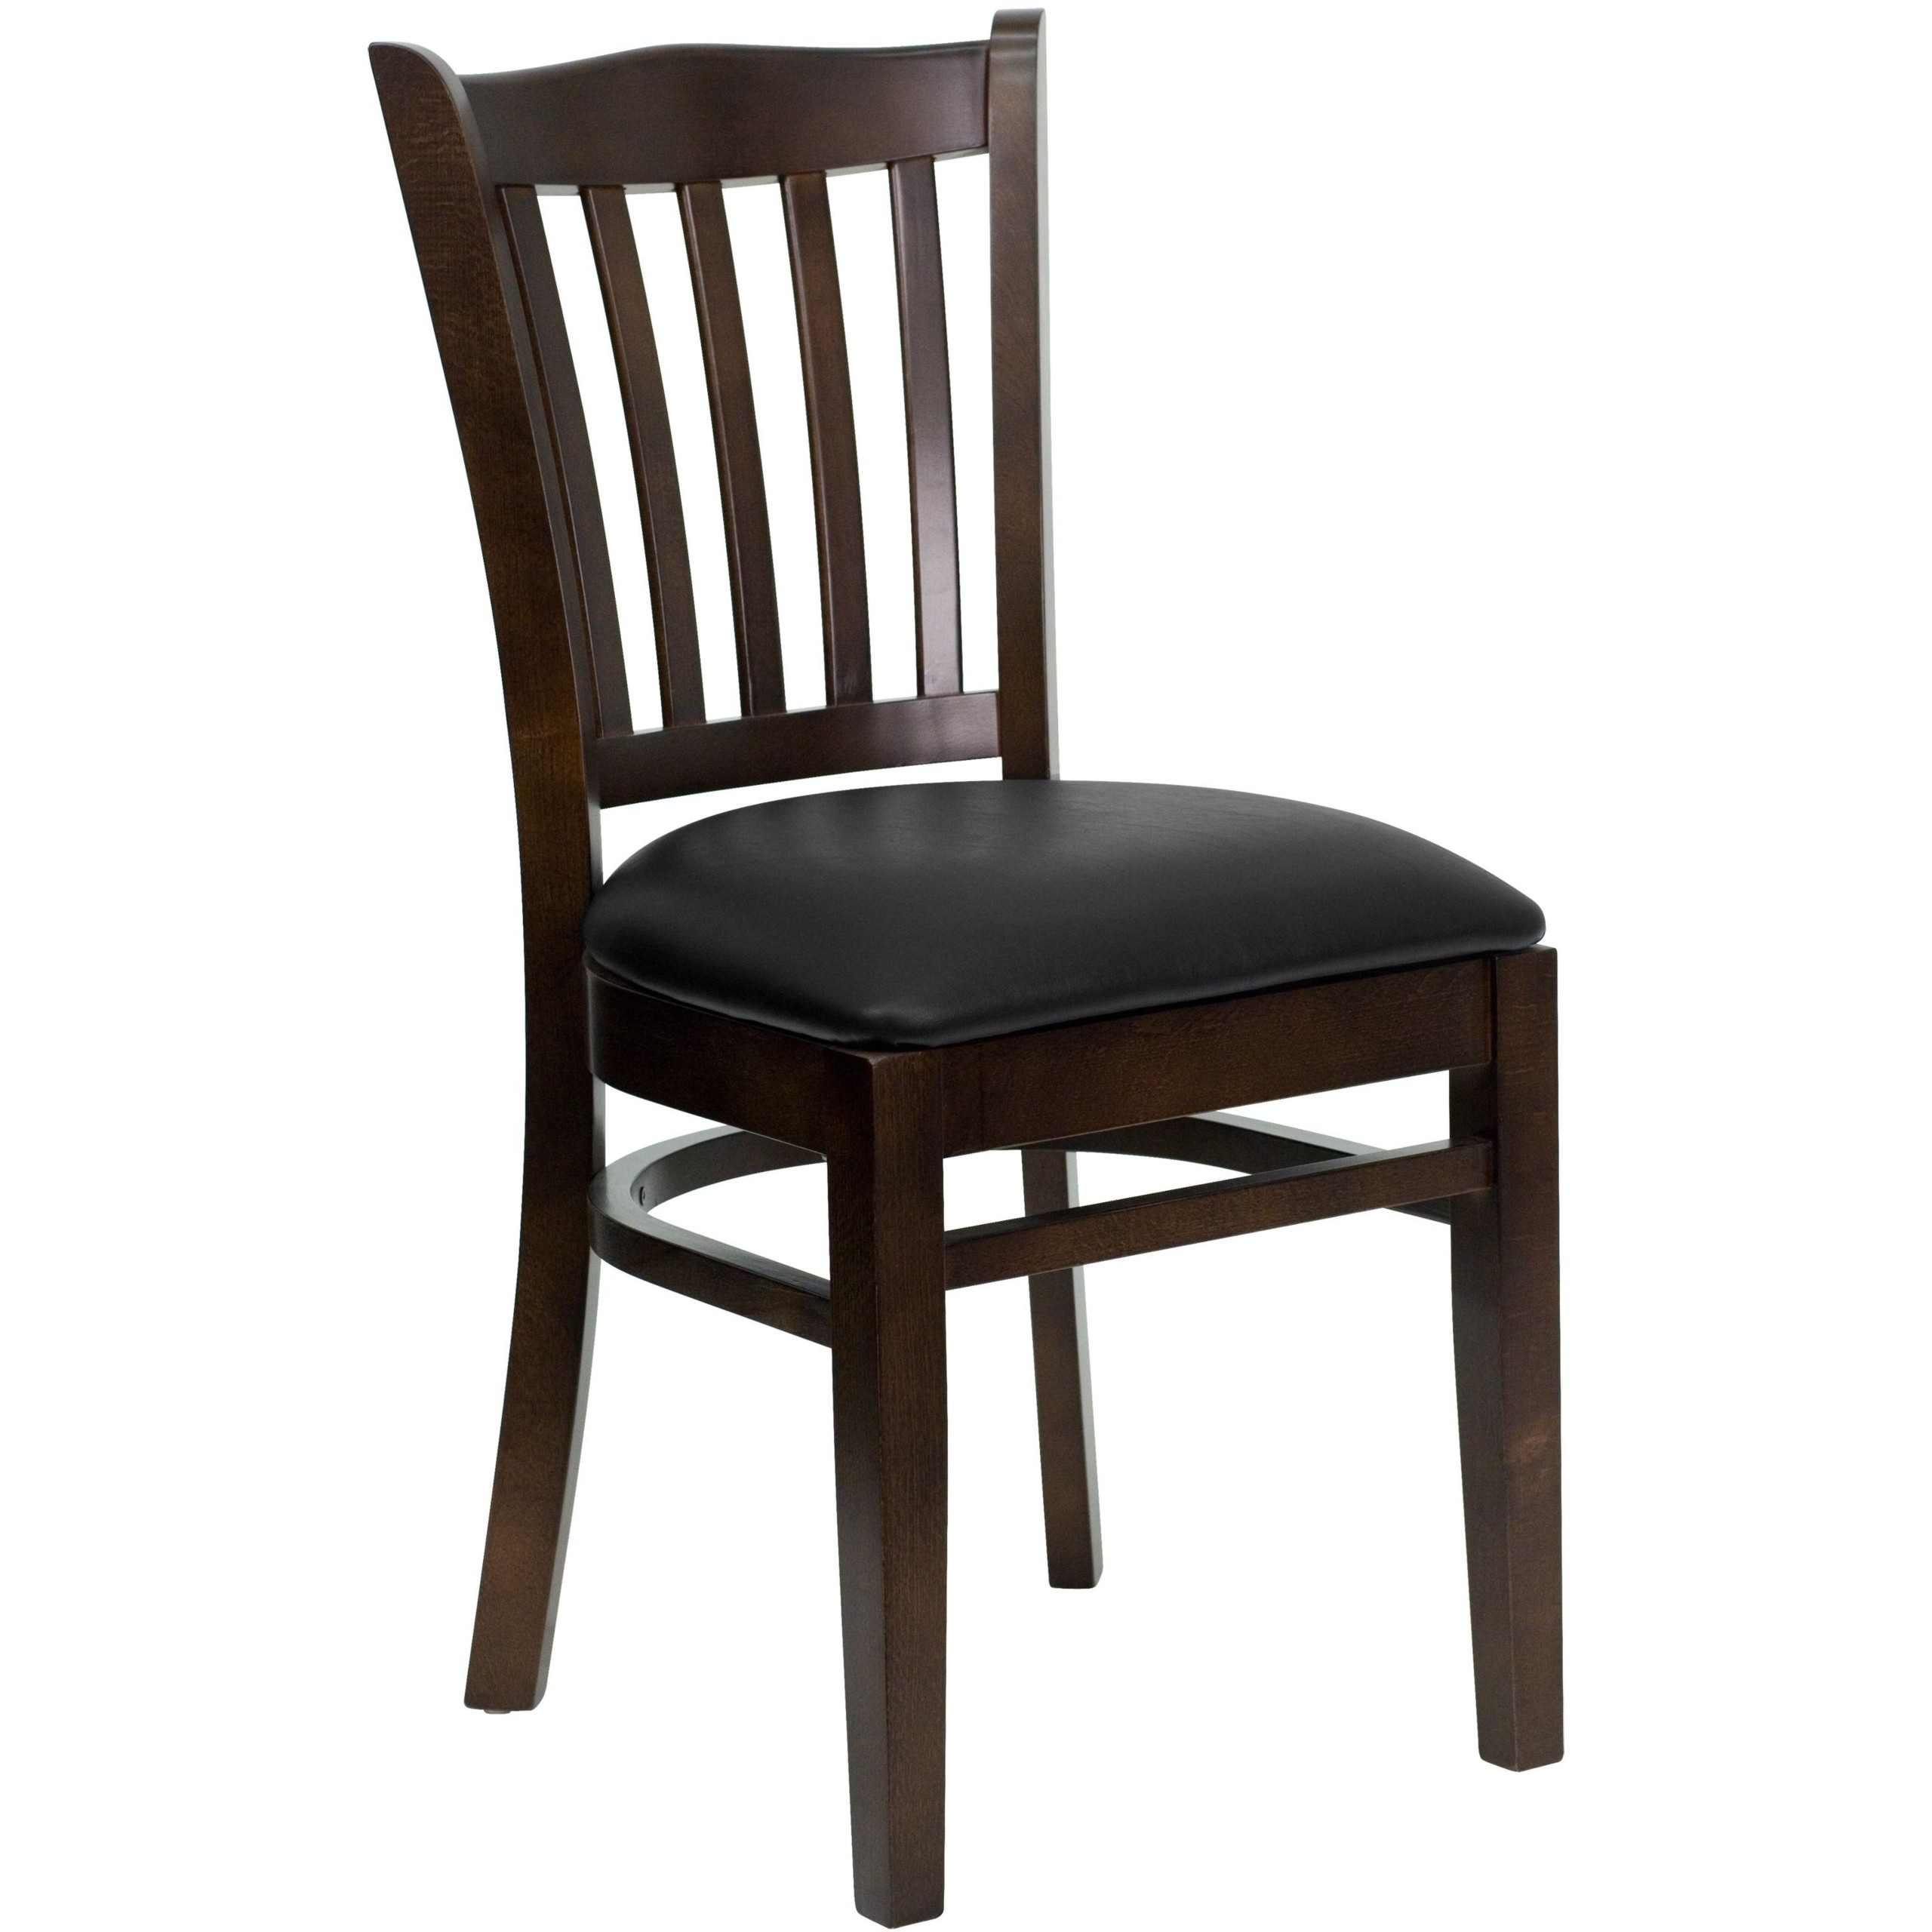 Heavy duty dining room chairs 3